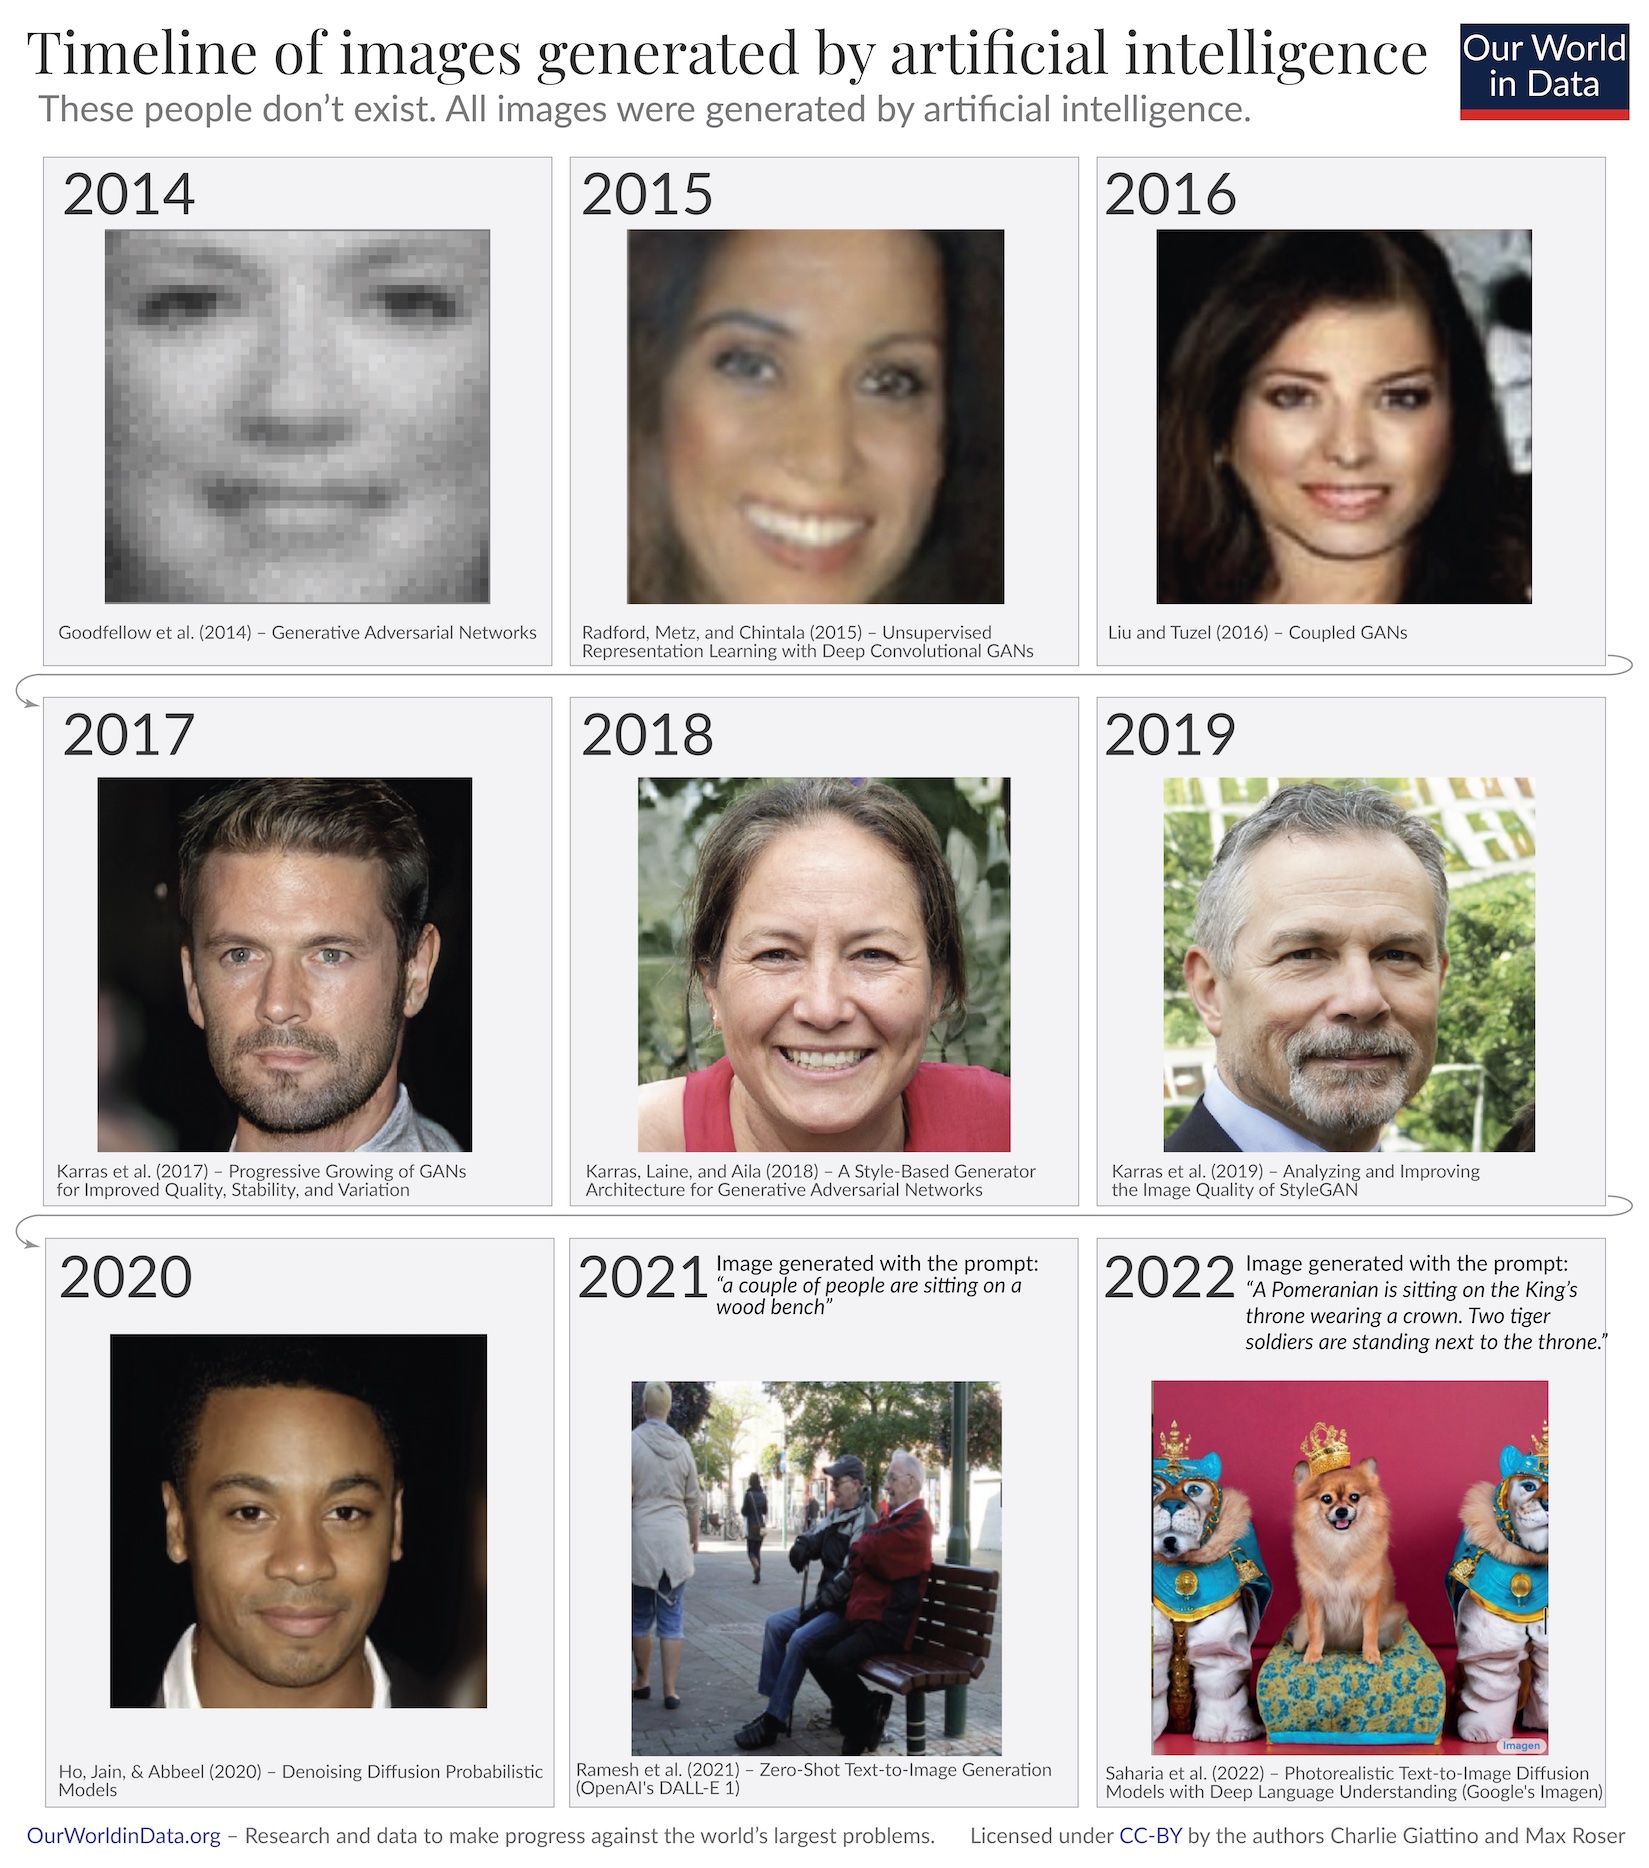 Timeline of artificially generated human faces from 2014 to 2022 showing the advancements in ai-generated imagery.